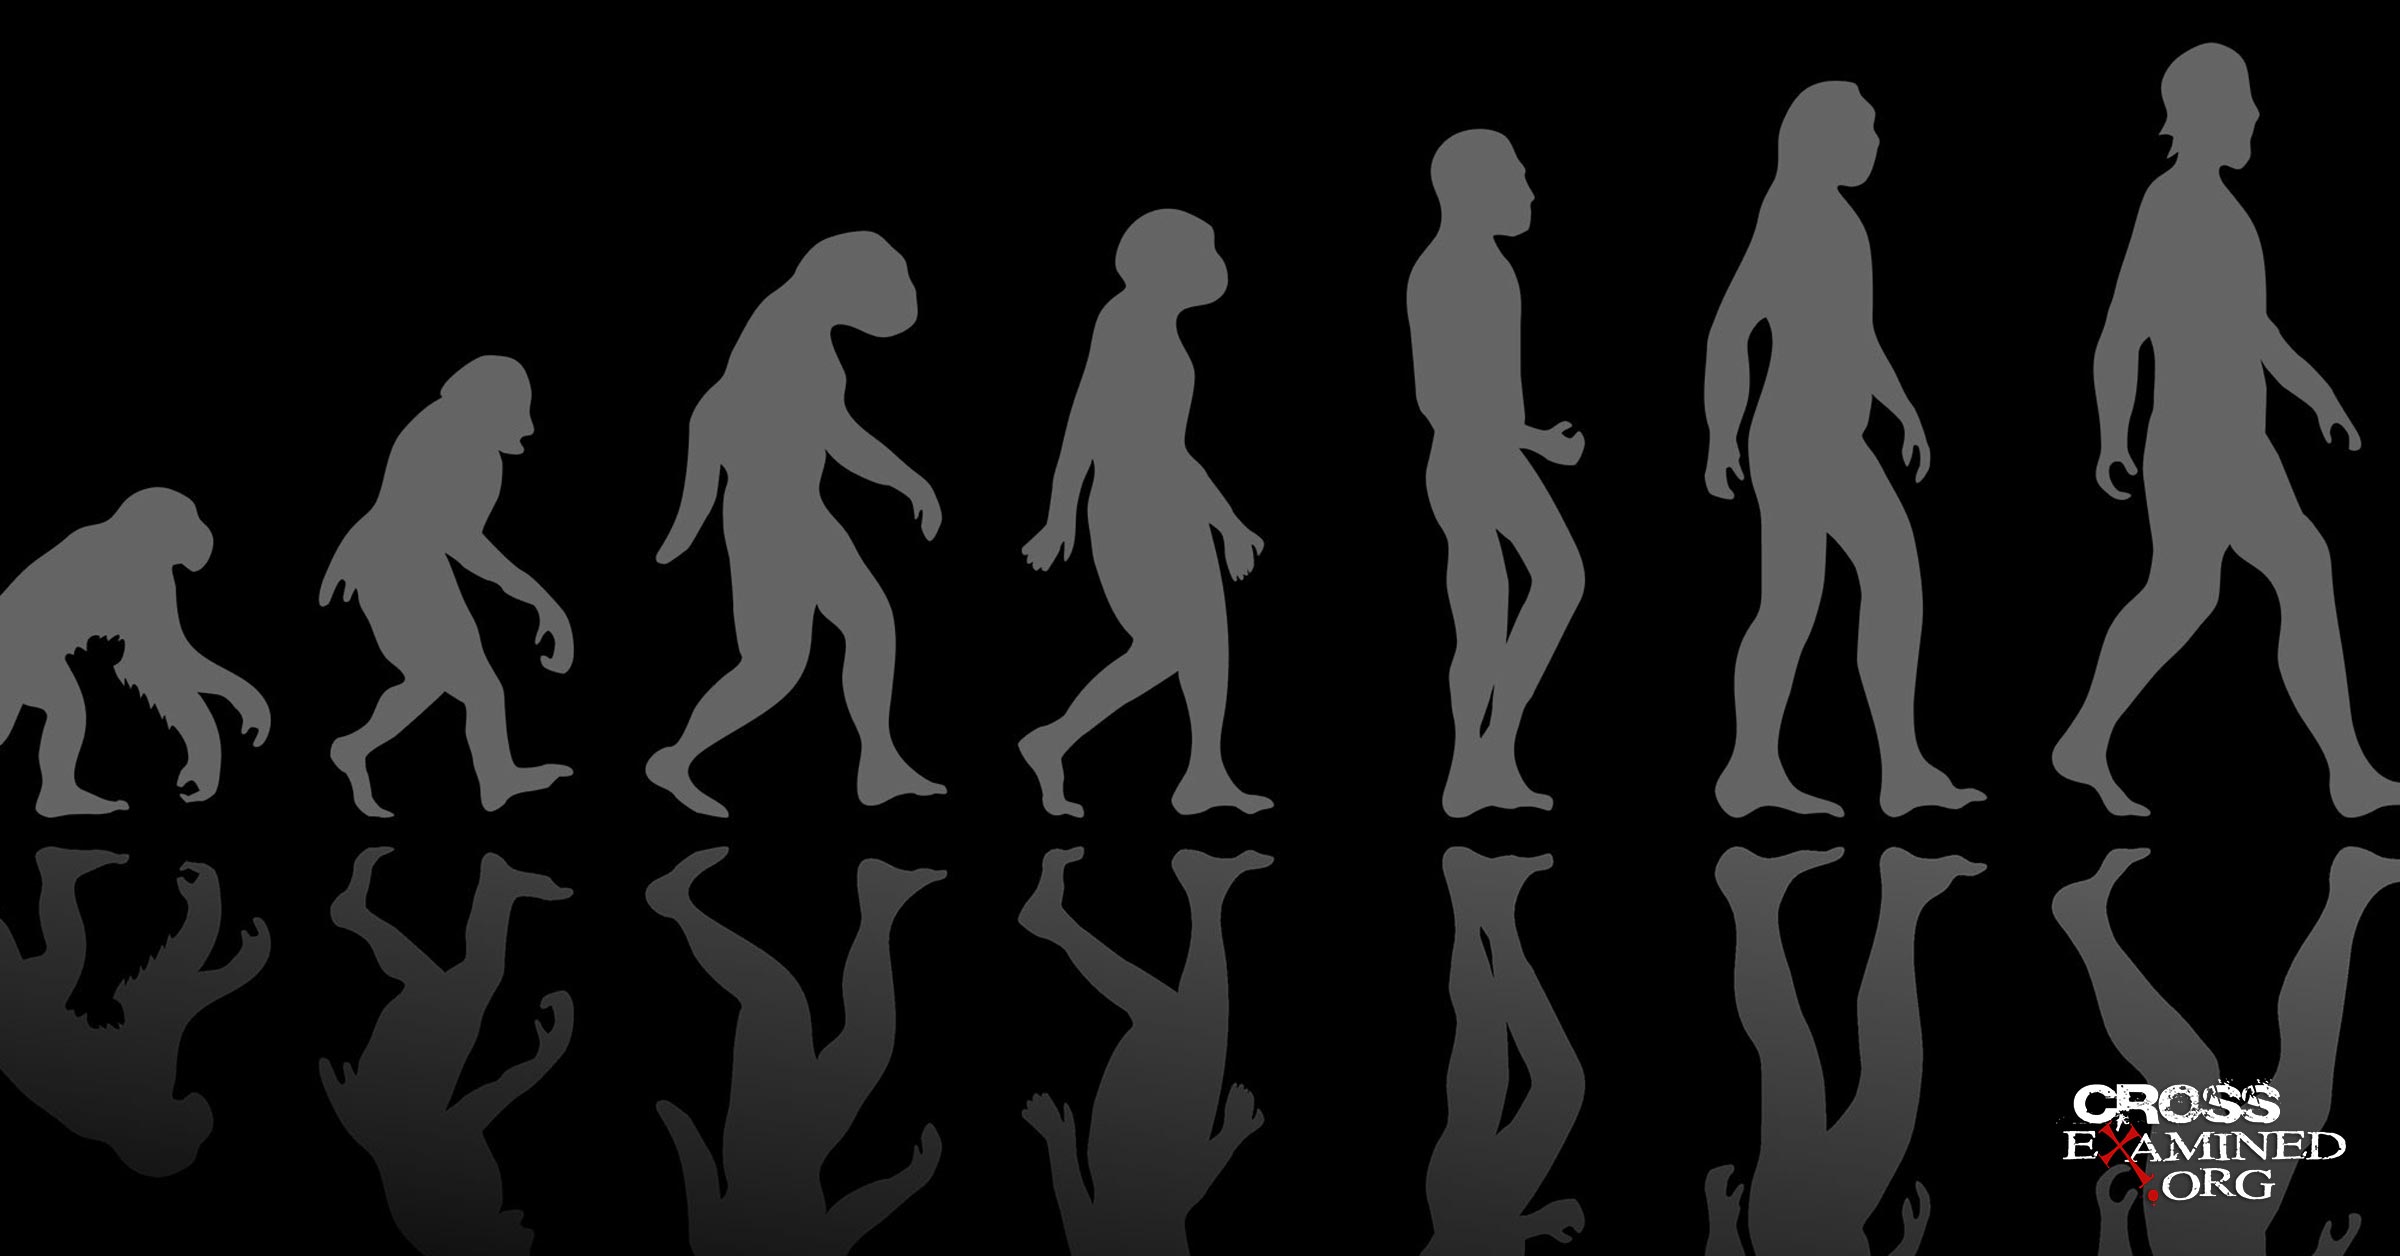 Why Studying Evolution Will Likely Challenge Your Kids’ Faith